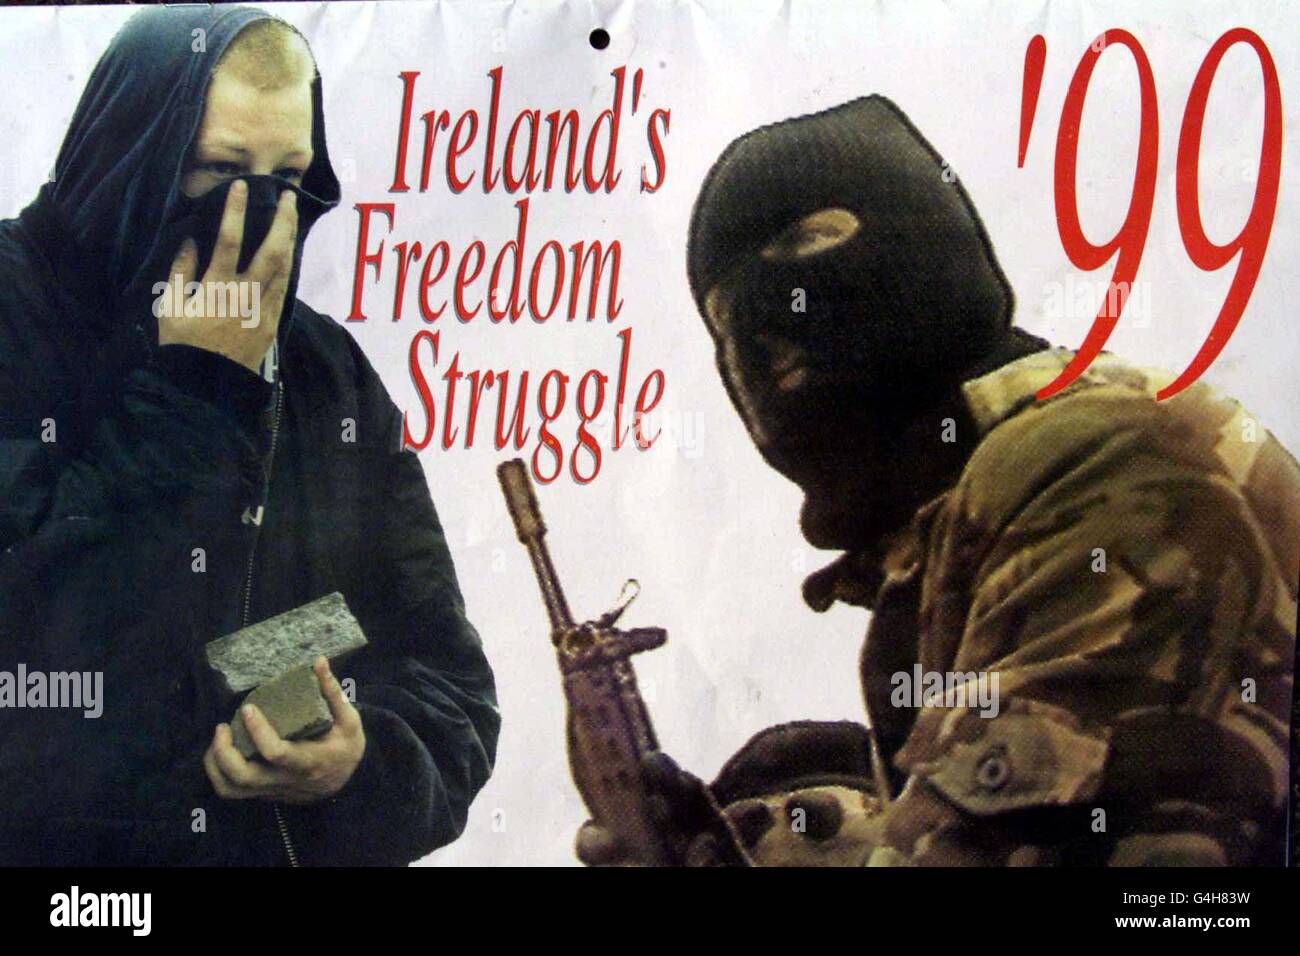 The front of the 1999 IRA Calendar depicting Photographs of IRA men with an array of weapons. The calendar has angered Unionists in Northern Ireland claiming it is in bad taste during a Peace Process. Photo by Paul Faith/PA. (E.D.I.) Stock Photo